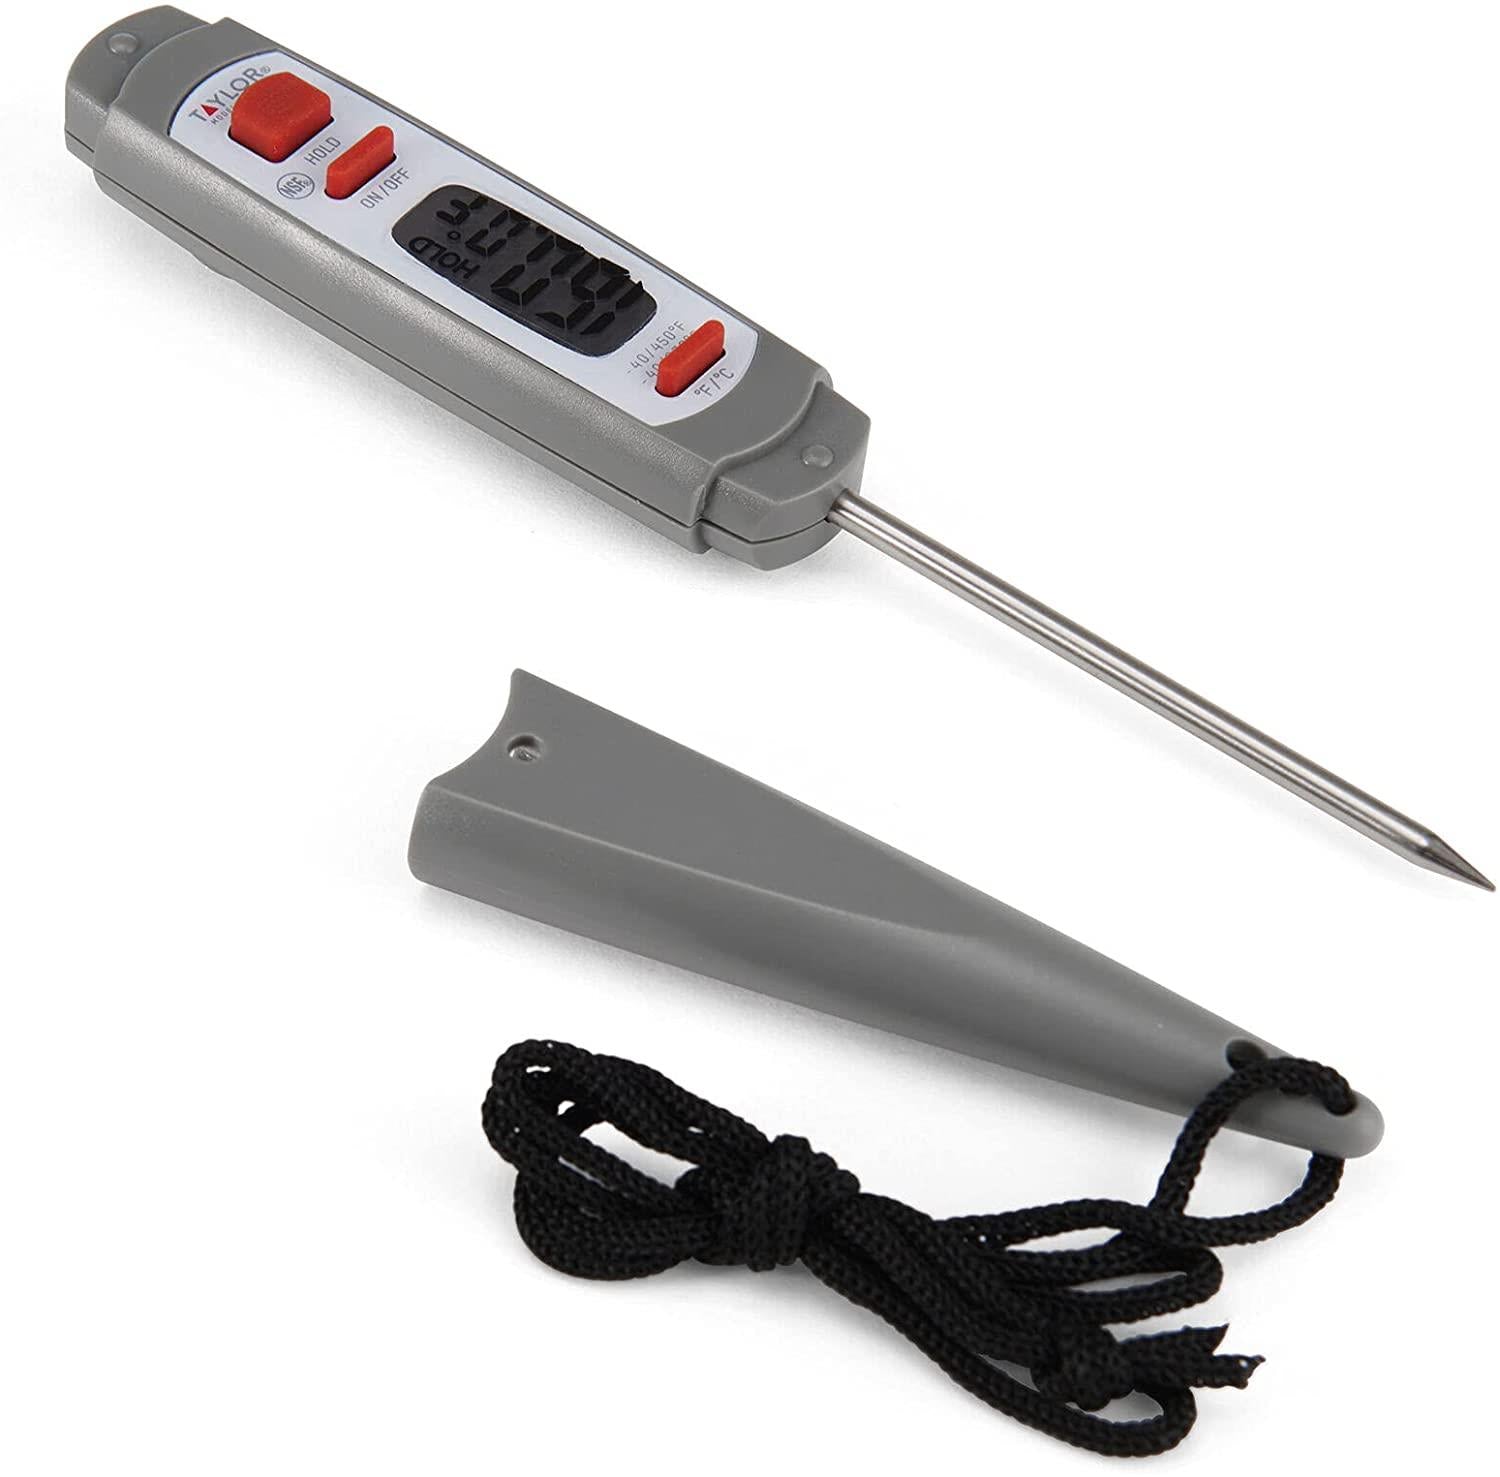 Taylor Pro Waterproof Instant Read Thermometer